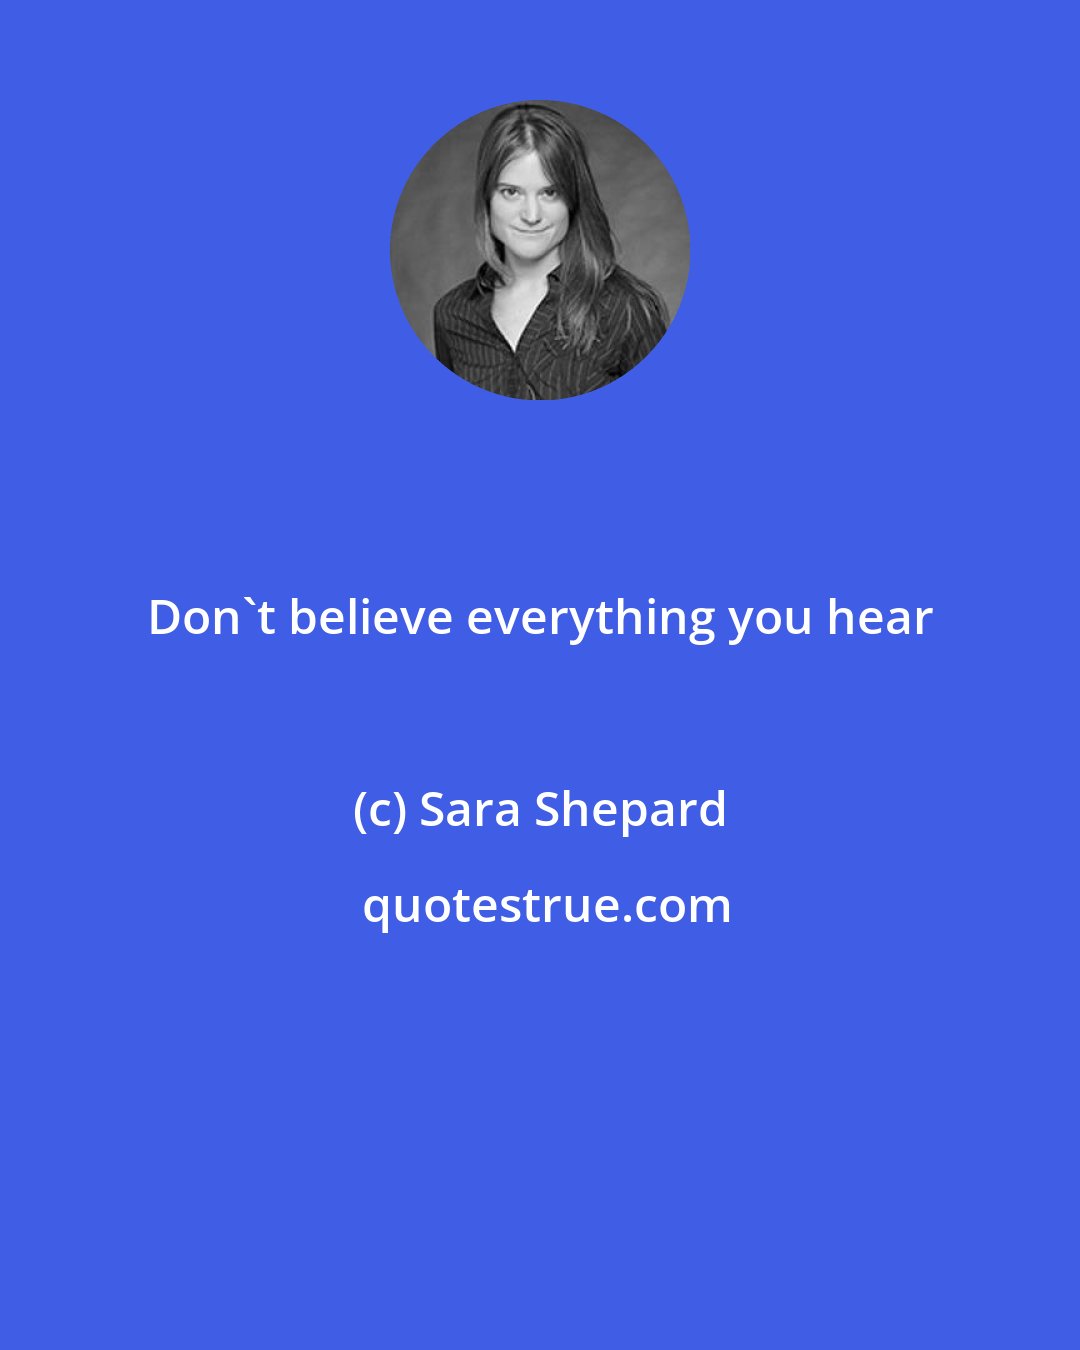 Sara Shepard: Don't believe everything you hear